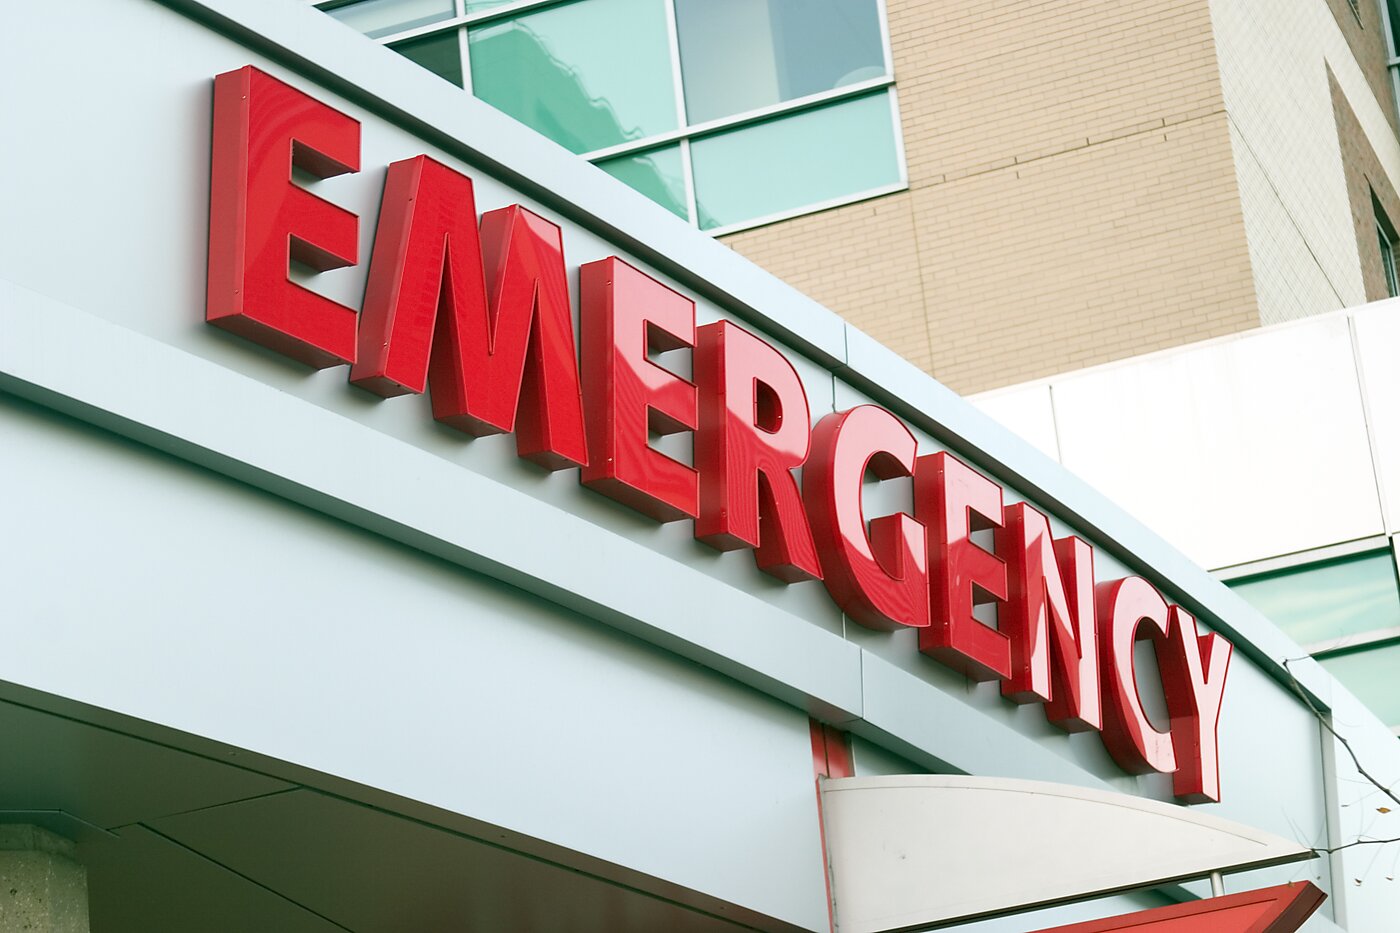 Sign shows the word emergency in red lettering